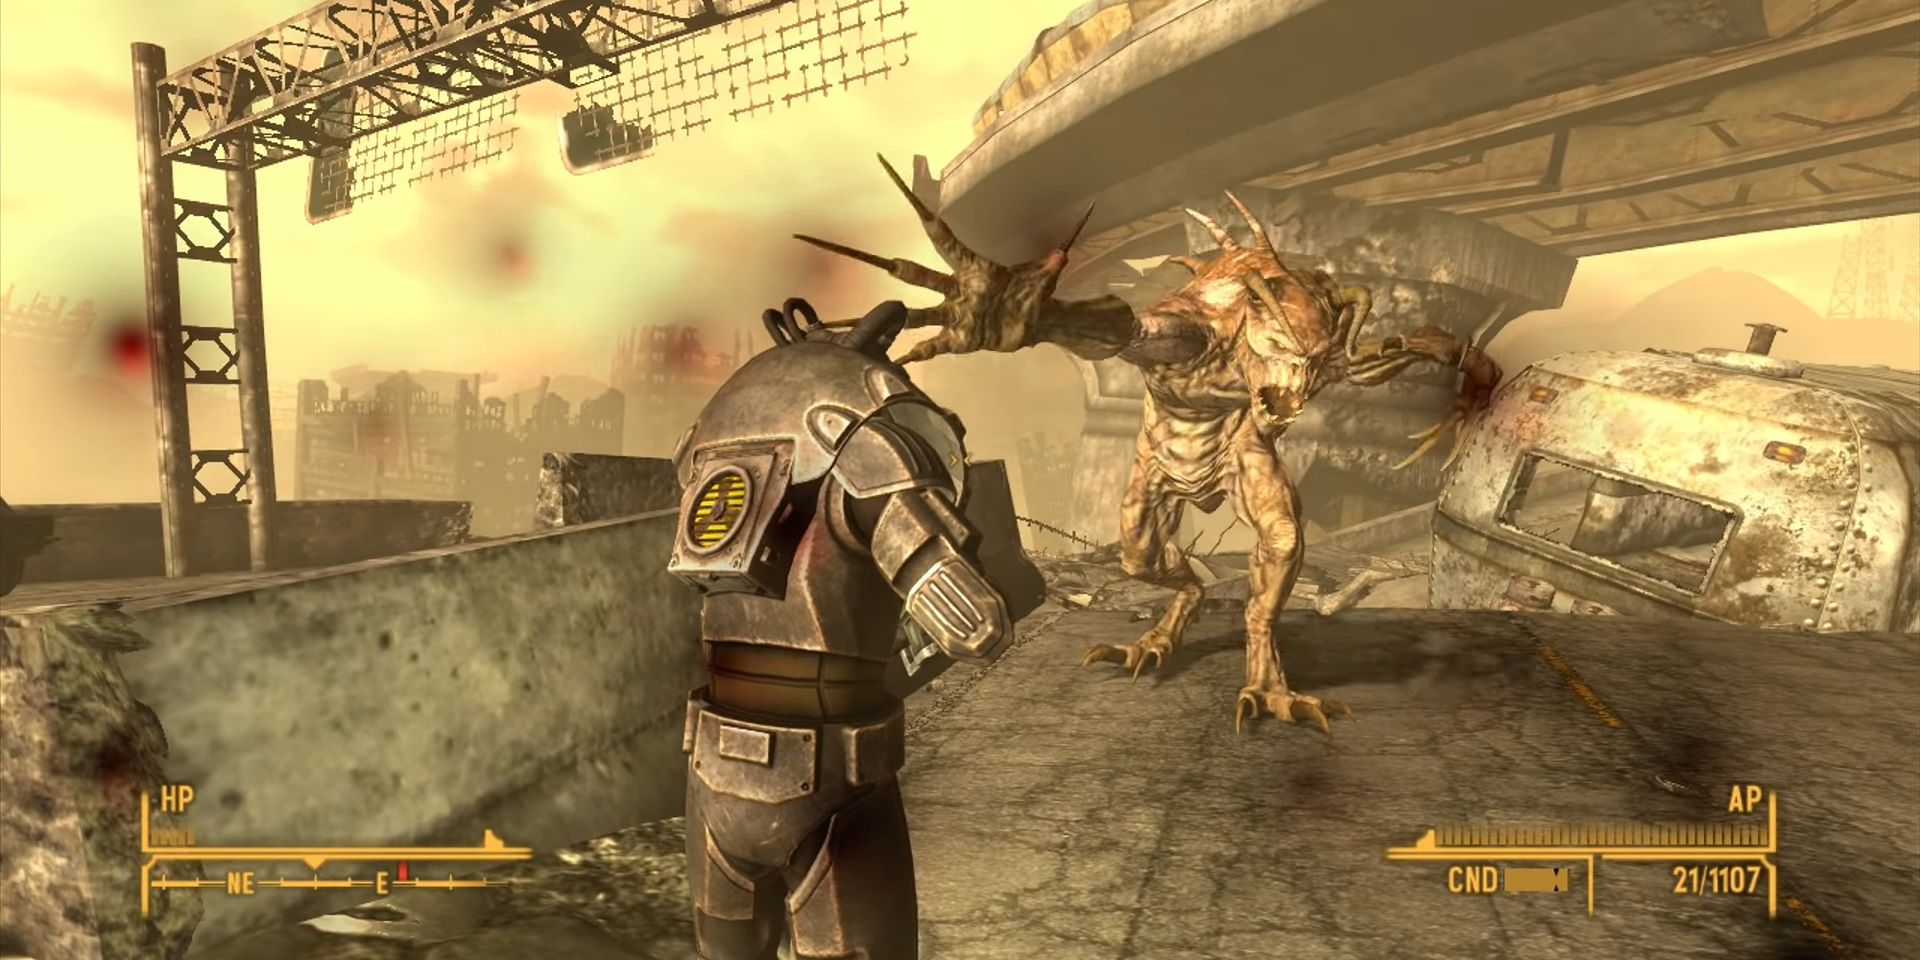 Fallout New Vegas: A death claw attacks the player